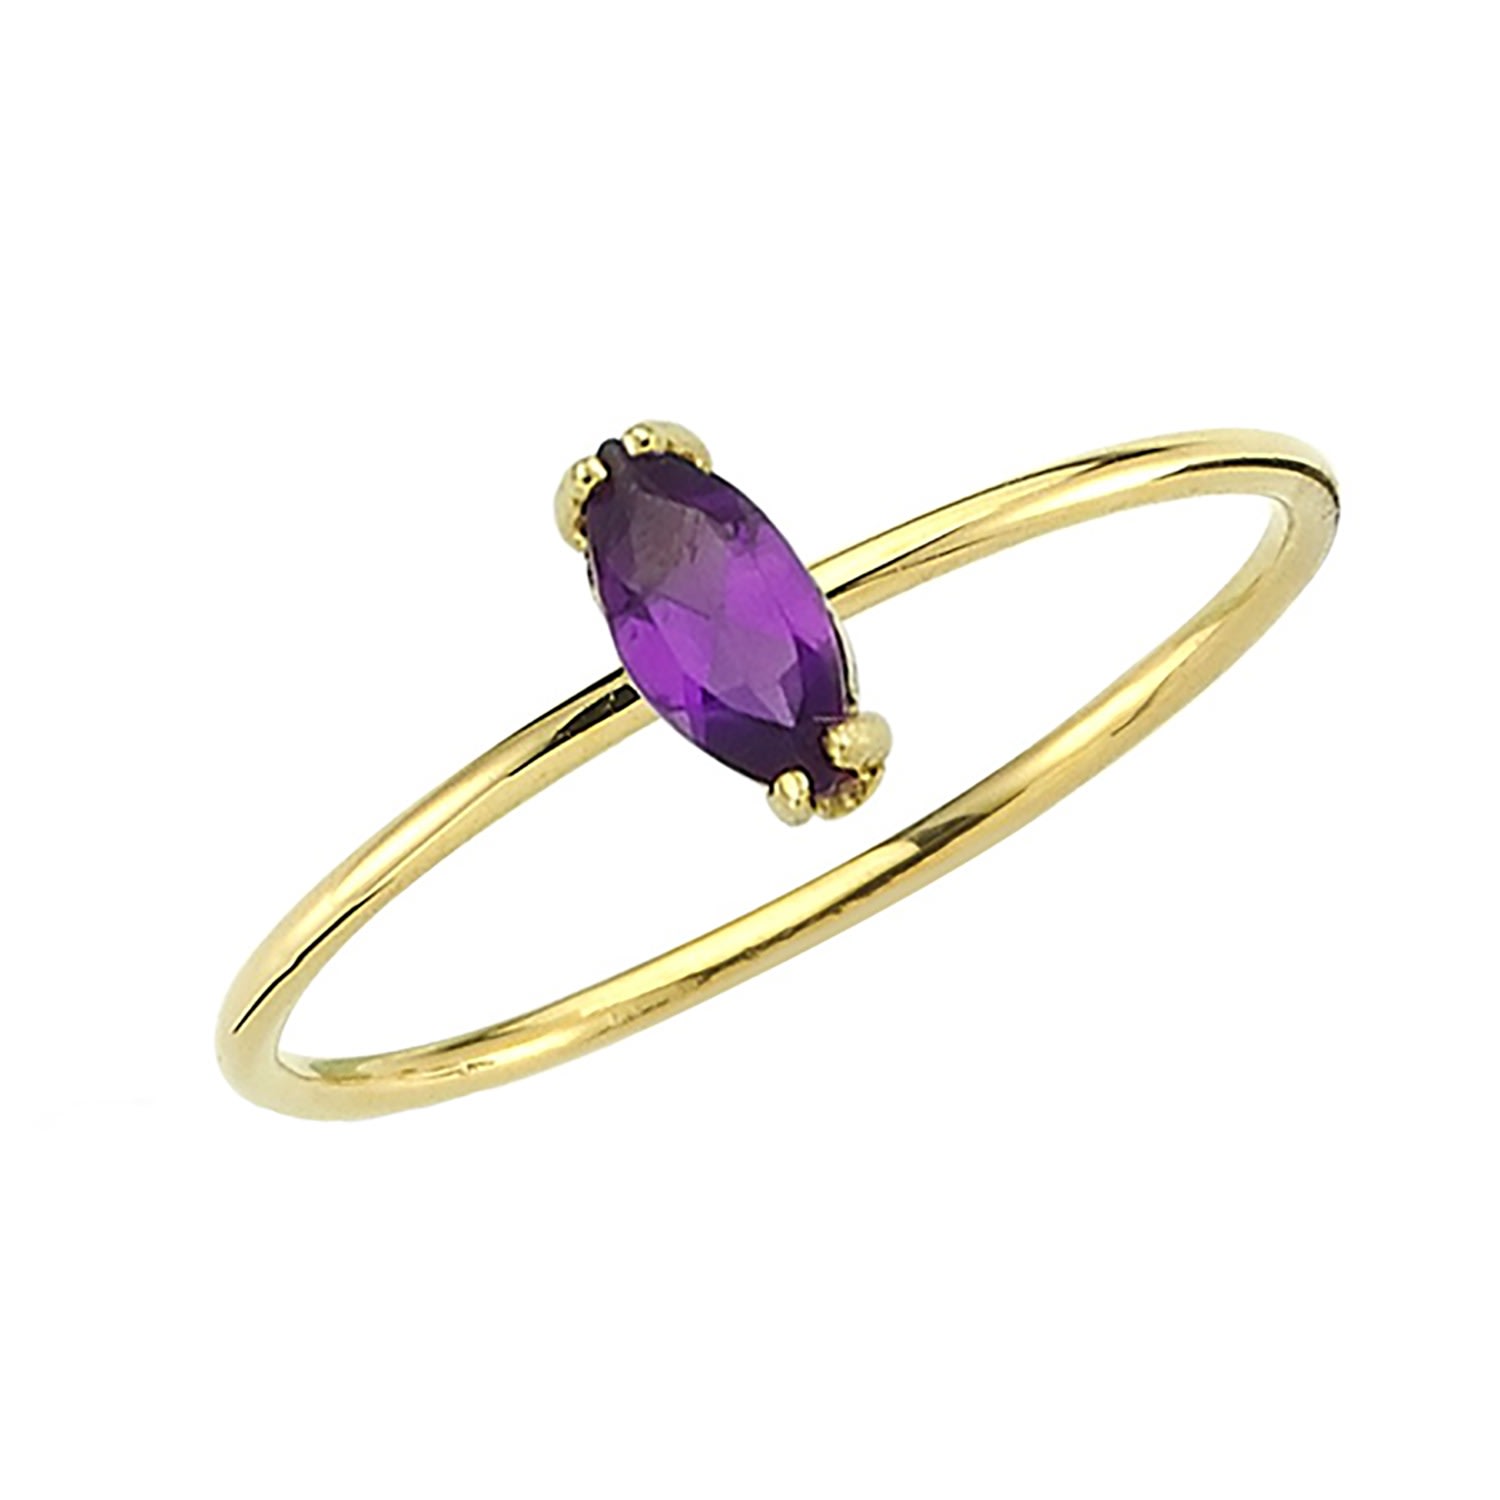 Ana Dyla Women's Gold Kissed Amethyst Ring